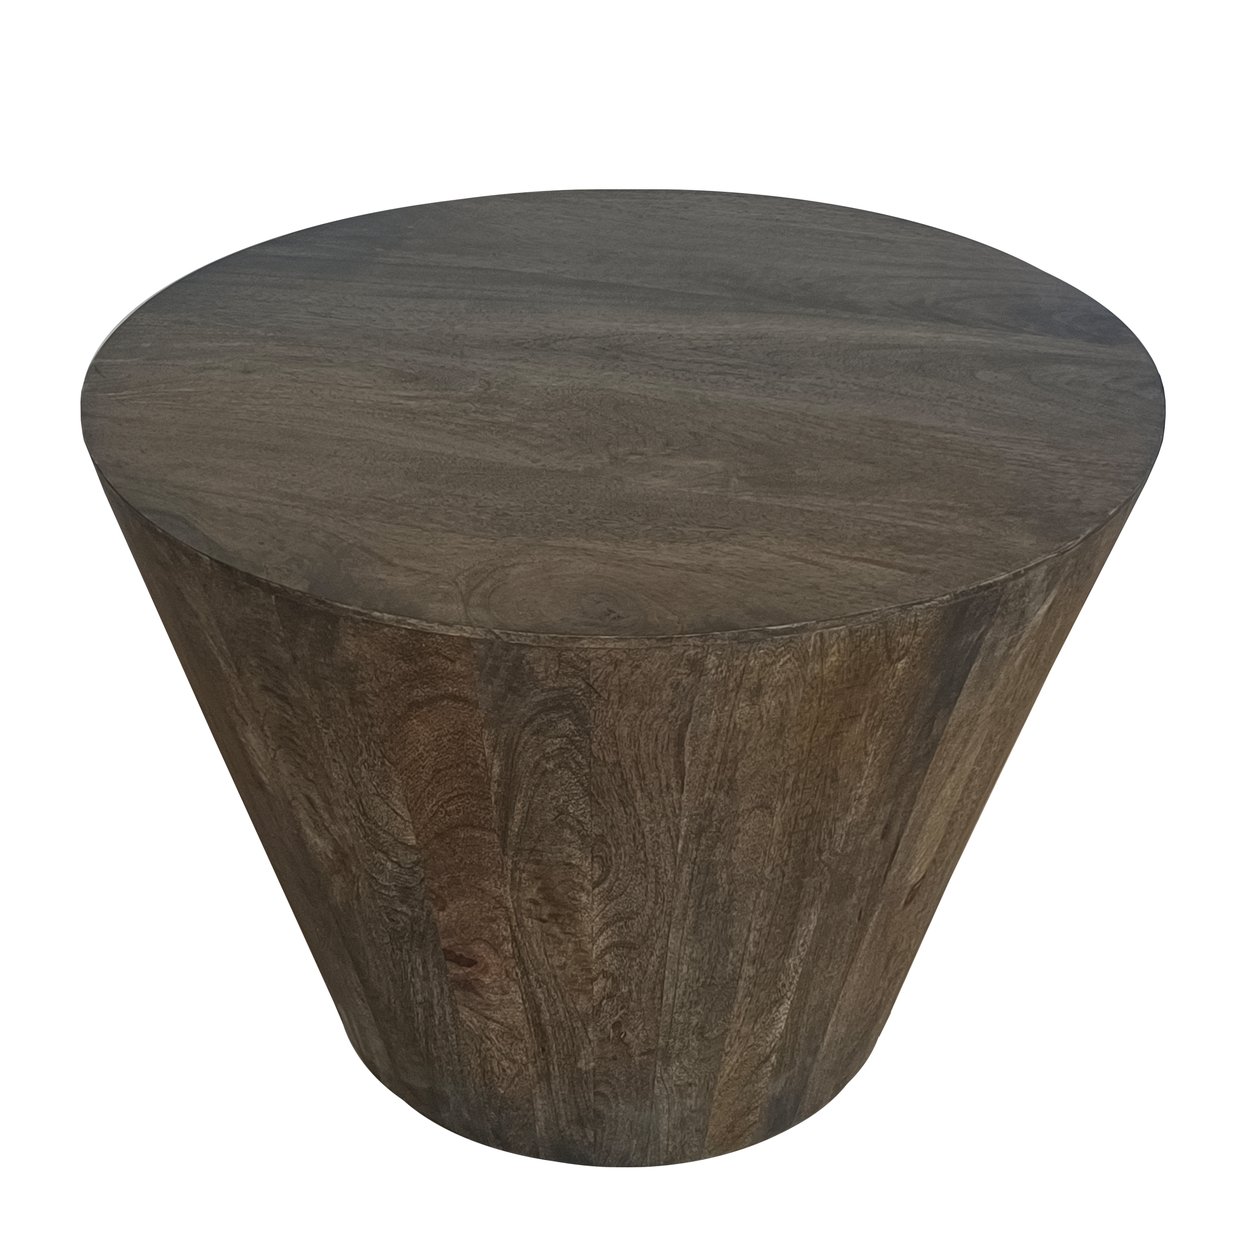 24 Inch Side End Table, Round Drum Shape, Handcrafted Distressed Gray Mango Wood - Saltoro Sherpi